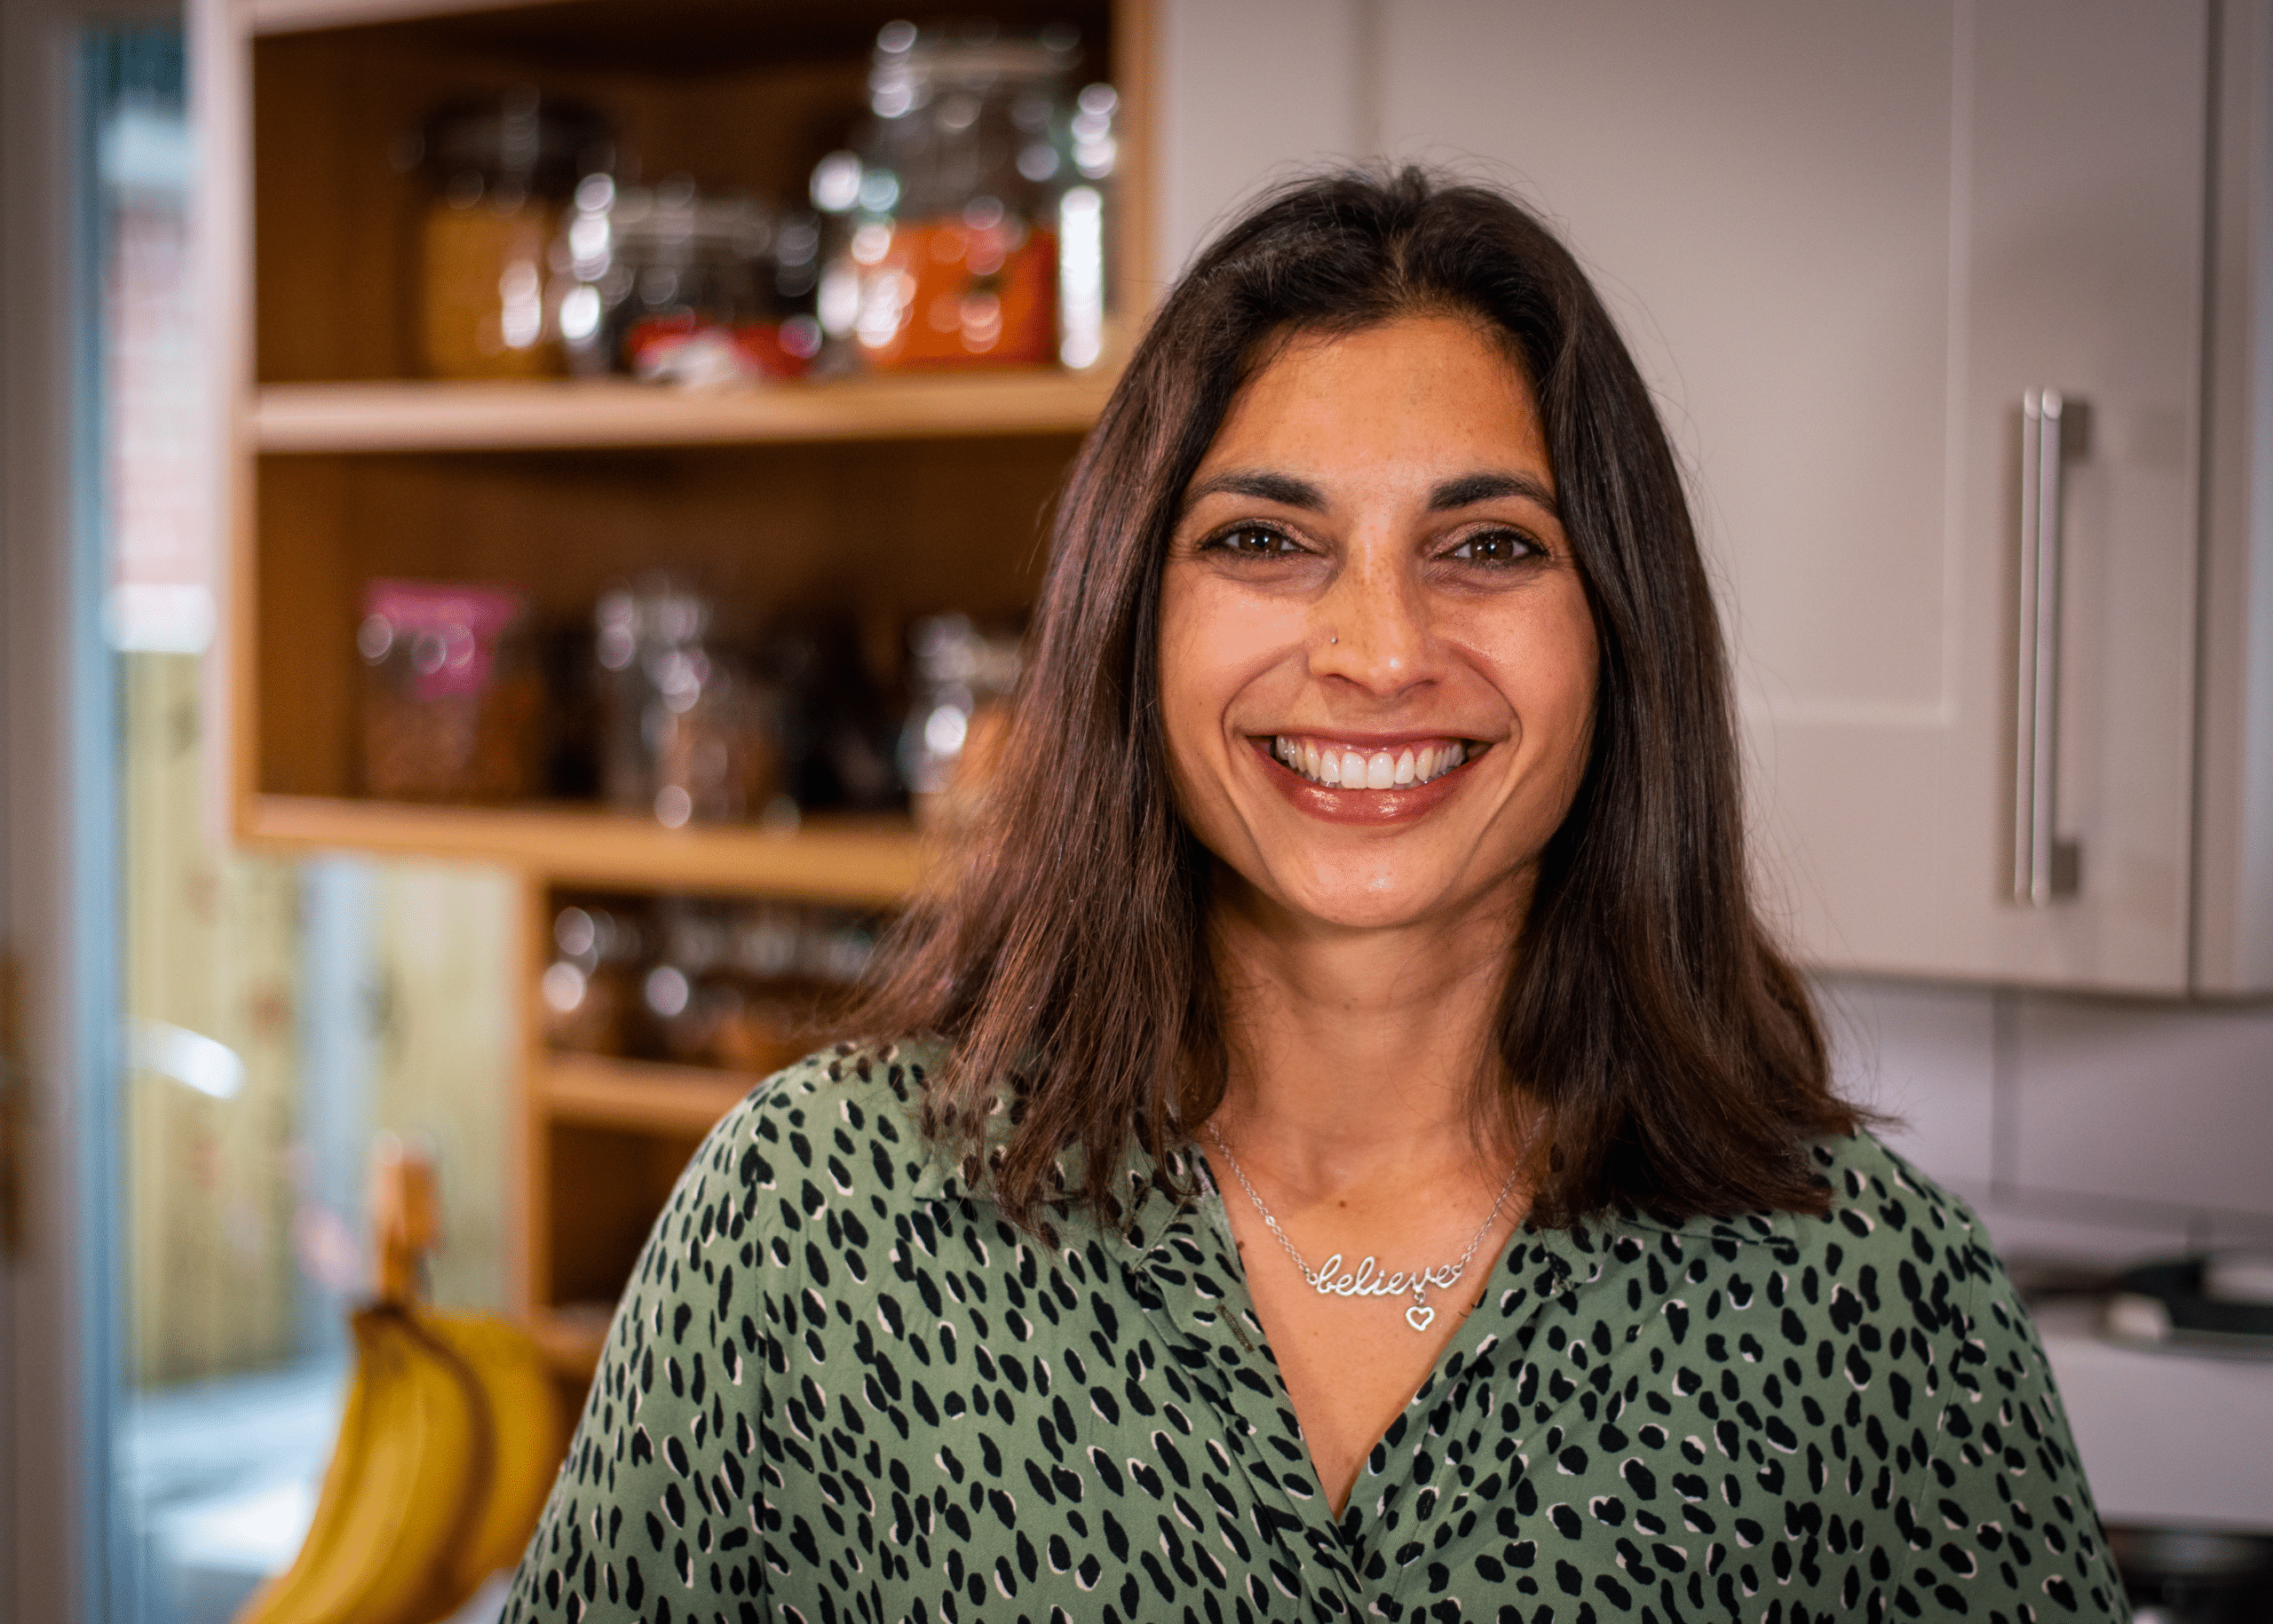 Image of Priya Tew, eating disorder dietitian in her kitchen in a green dress